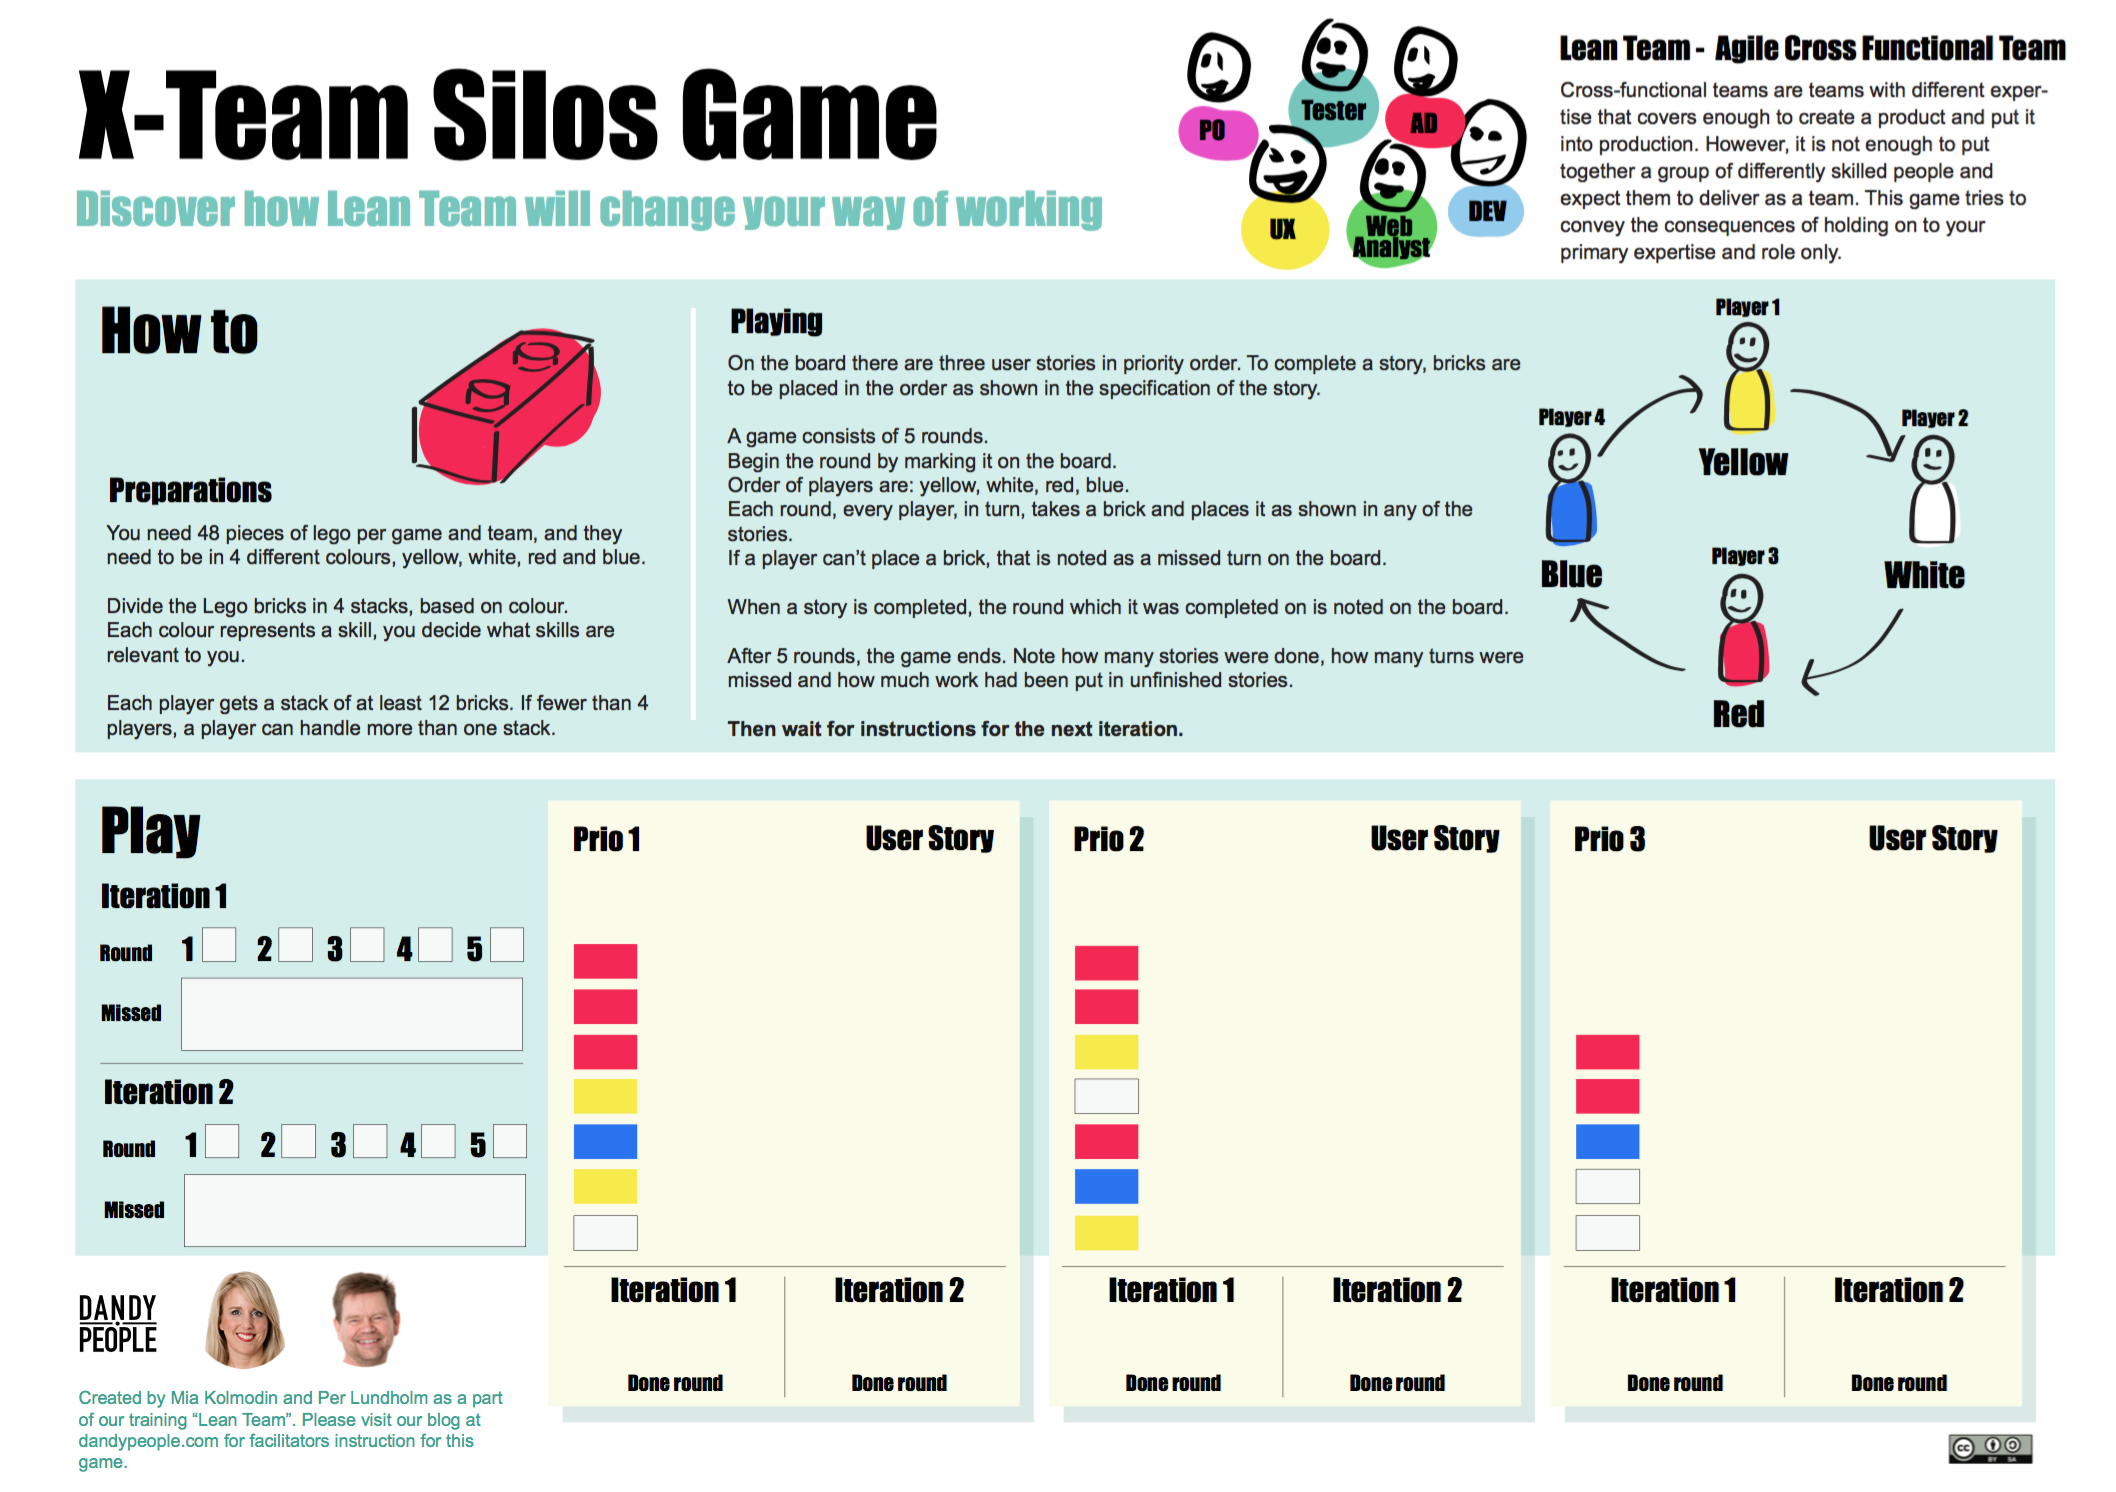 The x-team silos game poster.